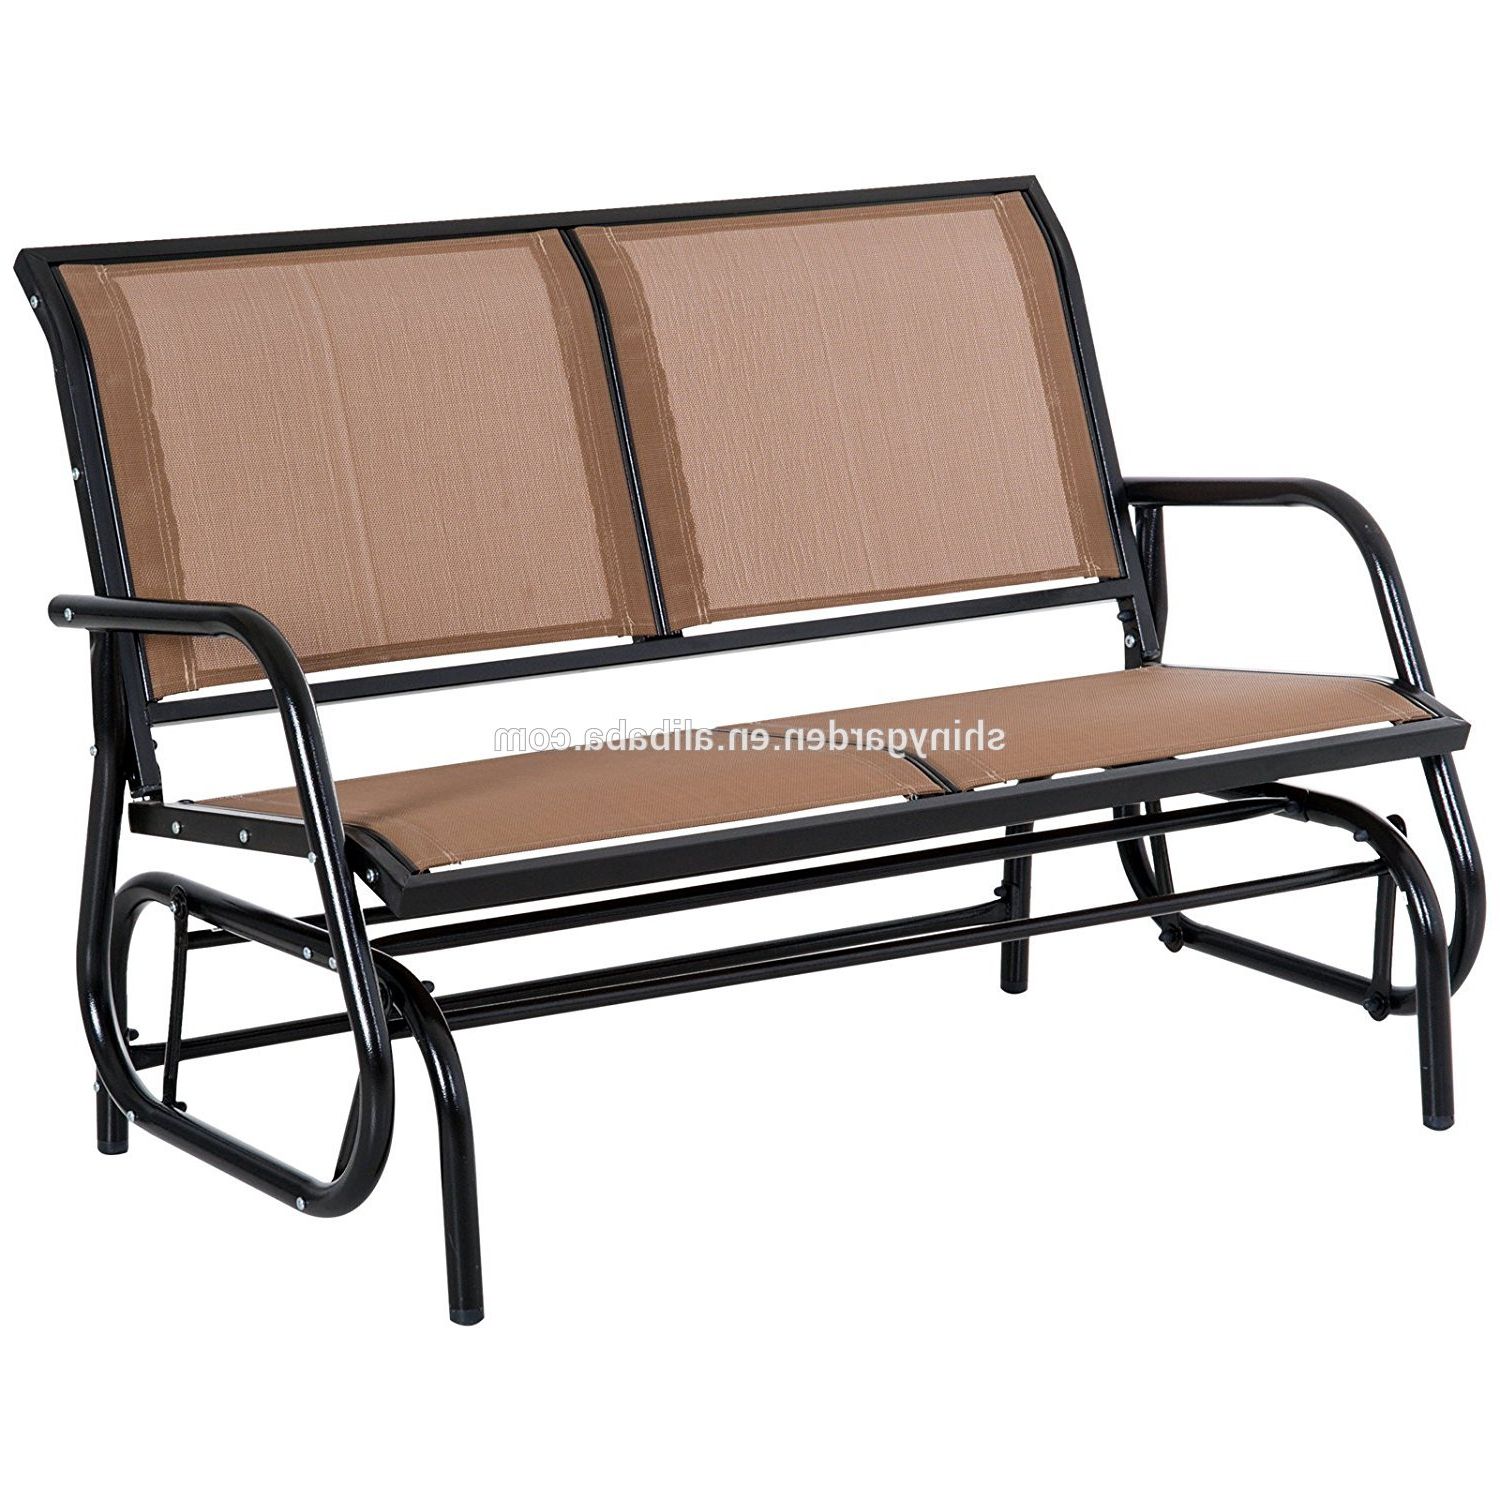 Well Known Outdoor Steel Patio Swing Glider Benches With Regard To Outdoor Swing Glider Chair,patio Bench For 2 Person,garden Rocking Seating  – Buy Swing Glider Chair Product On Alibaba (View 21 of 30)